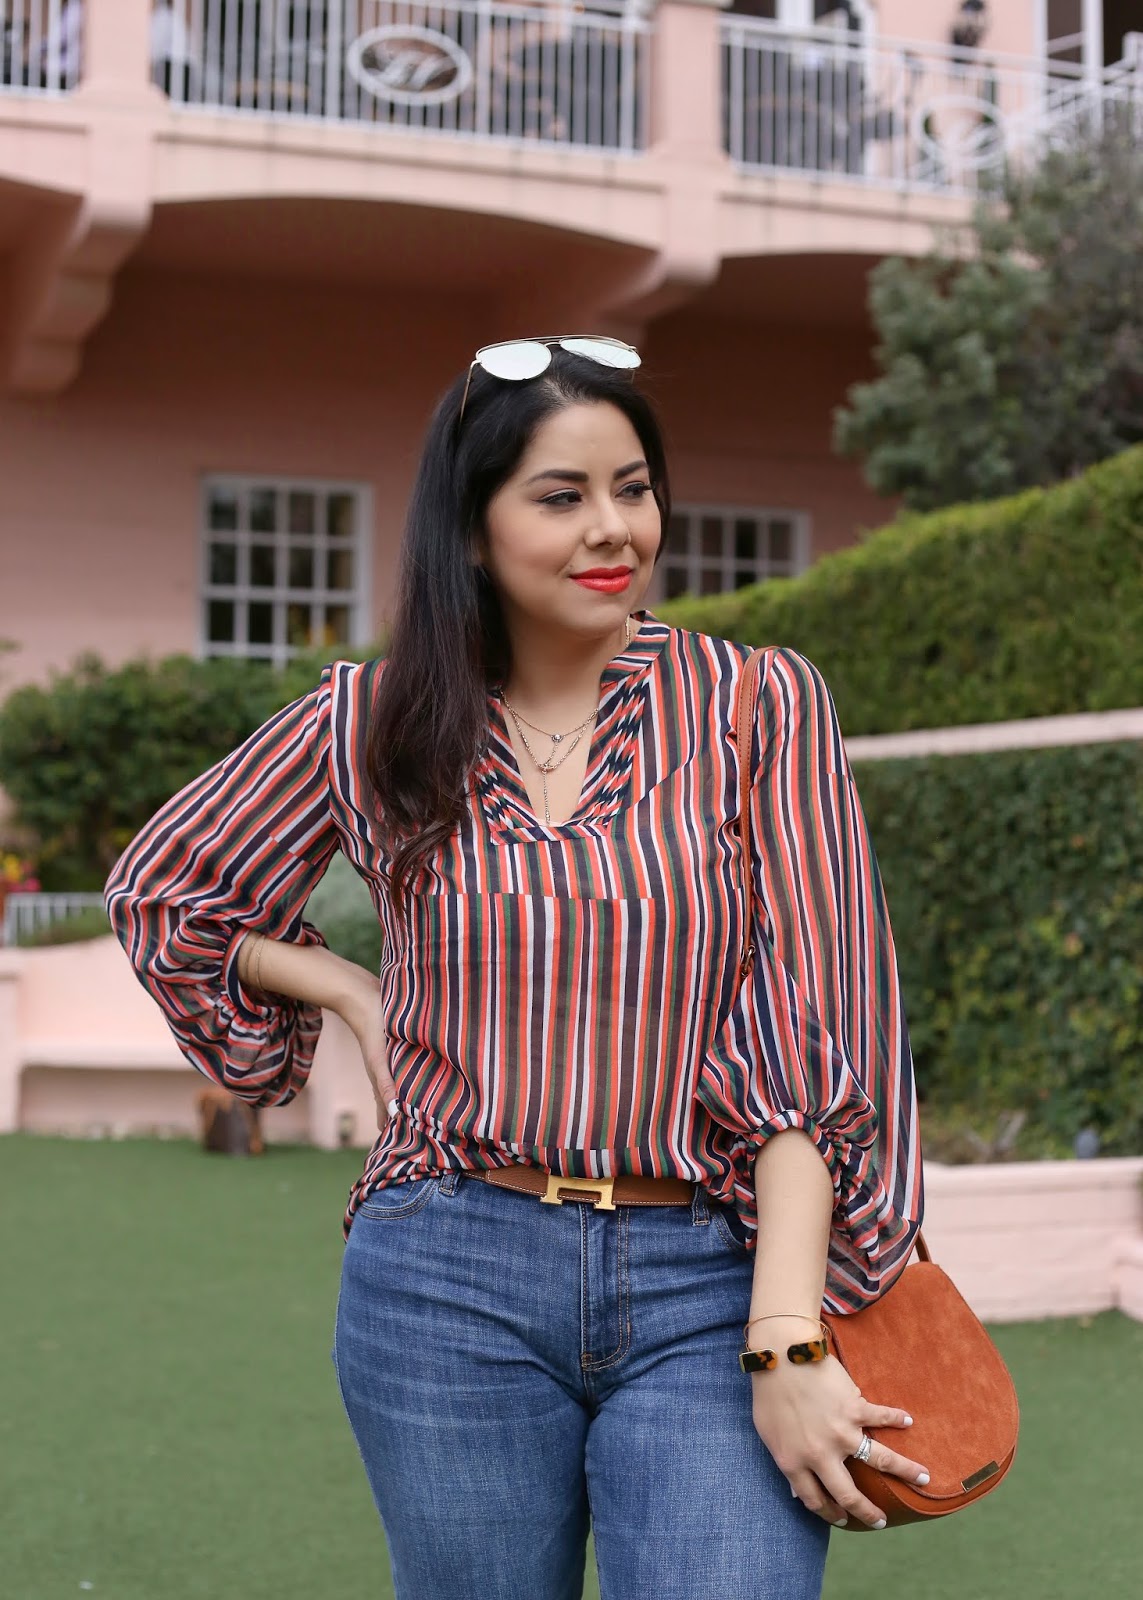 The Ultimate Blouse for Spring - Lil bits of Chic